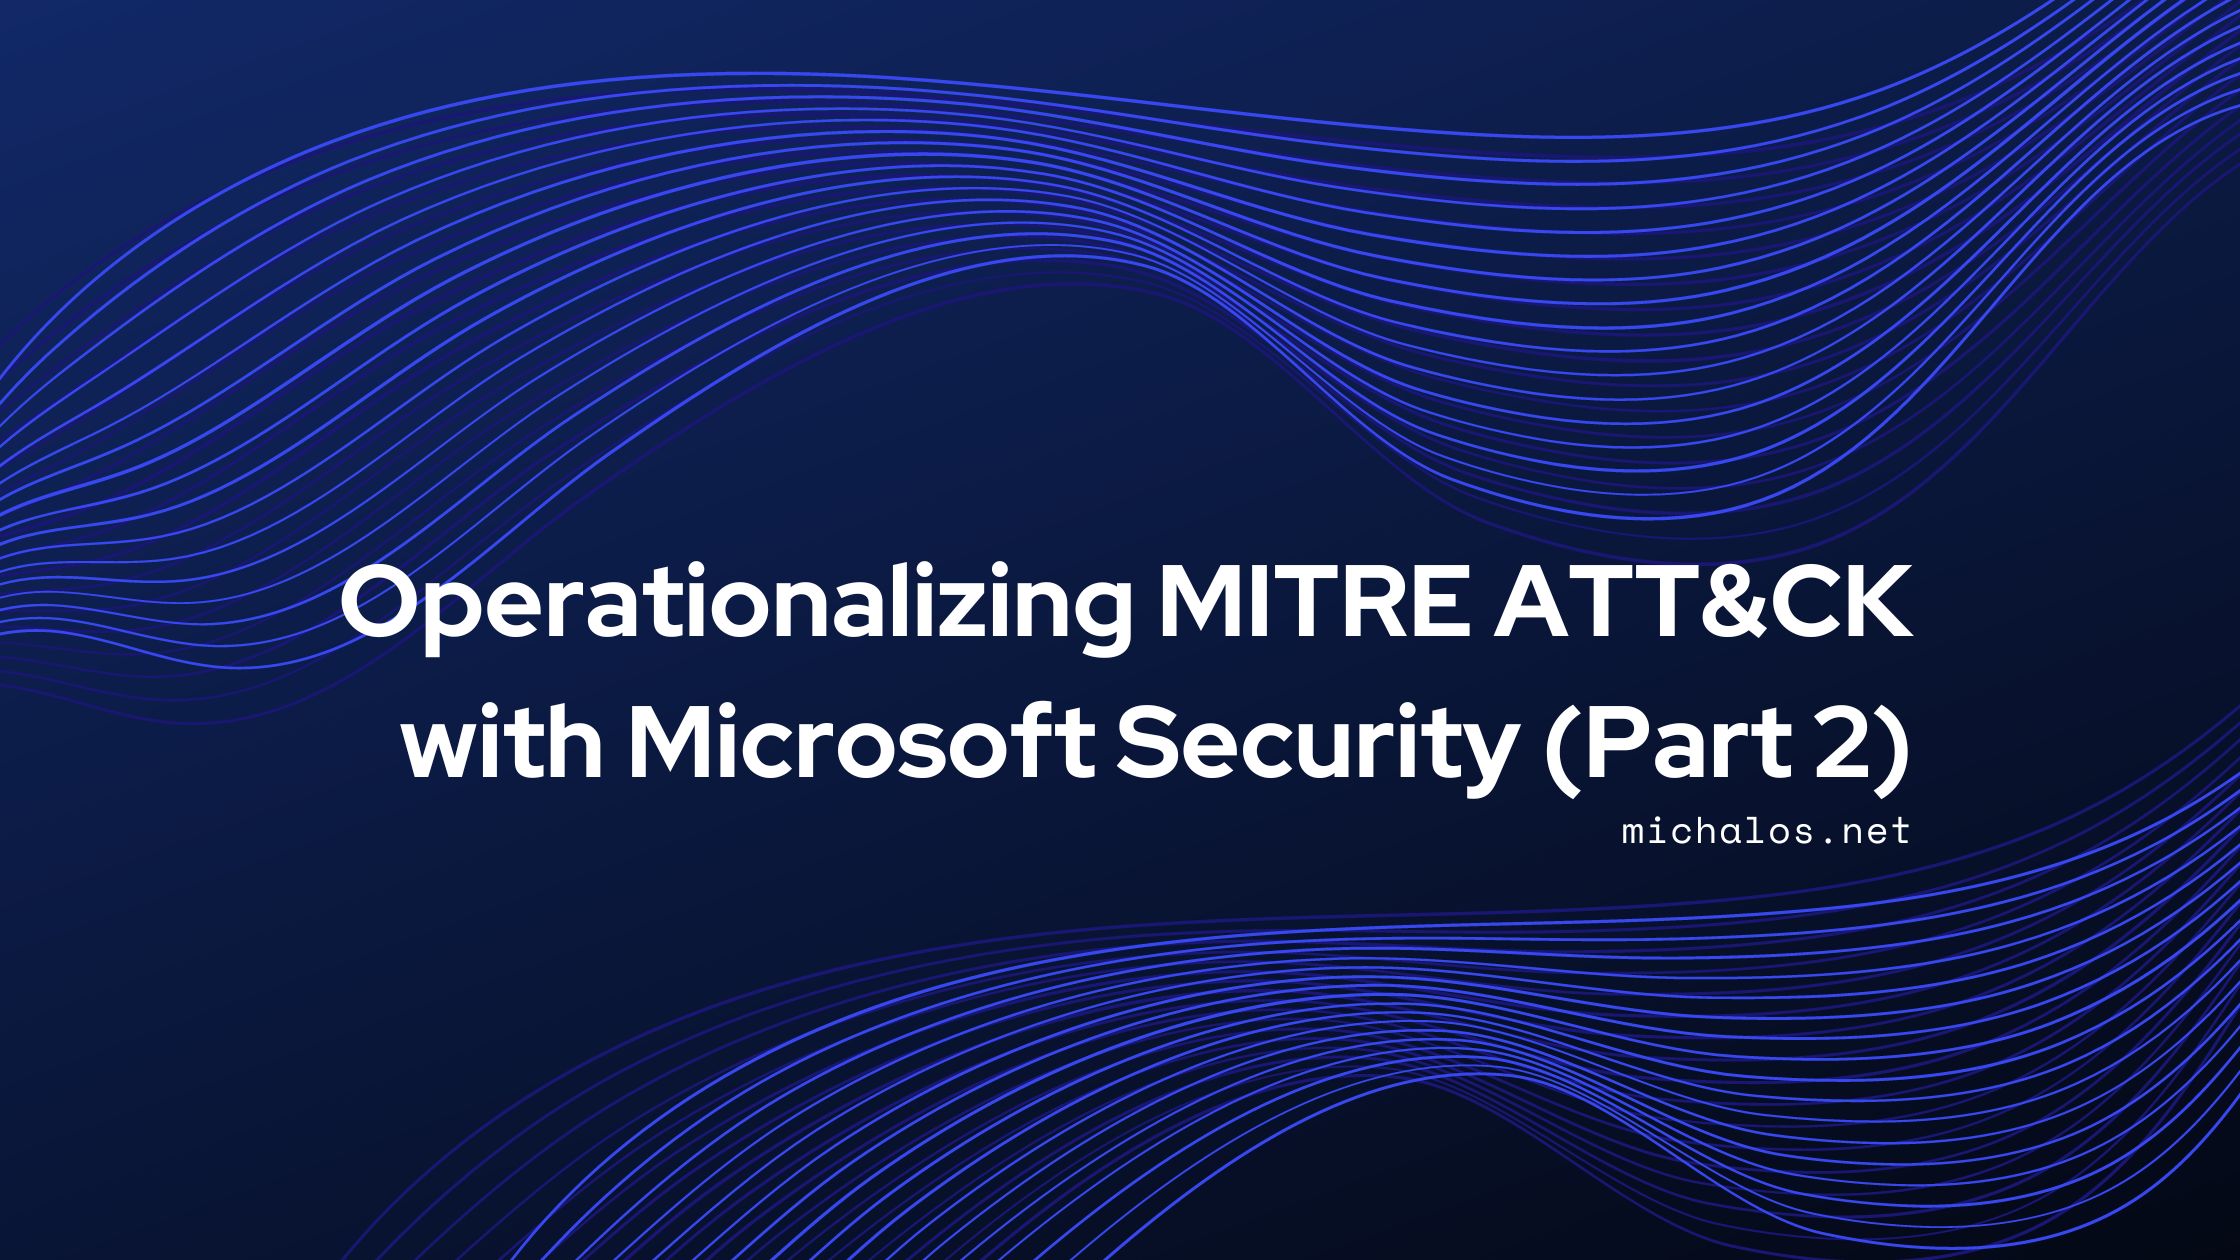 Operationalizing MITRE ATT&CK with Microsoft Security (Part 2)